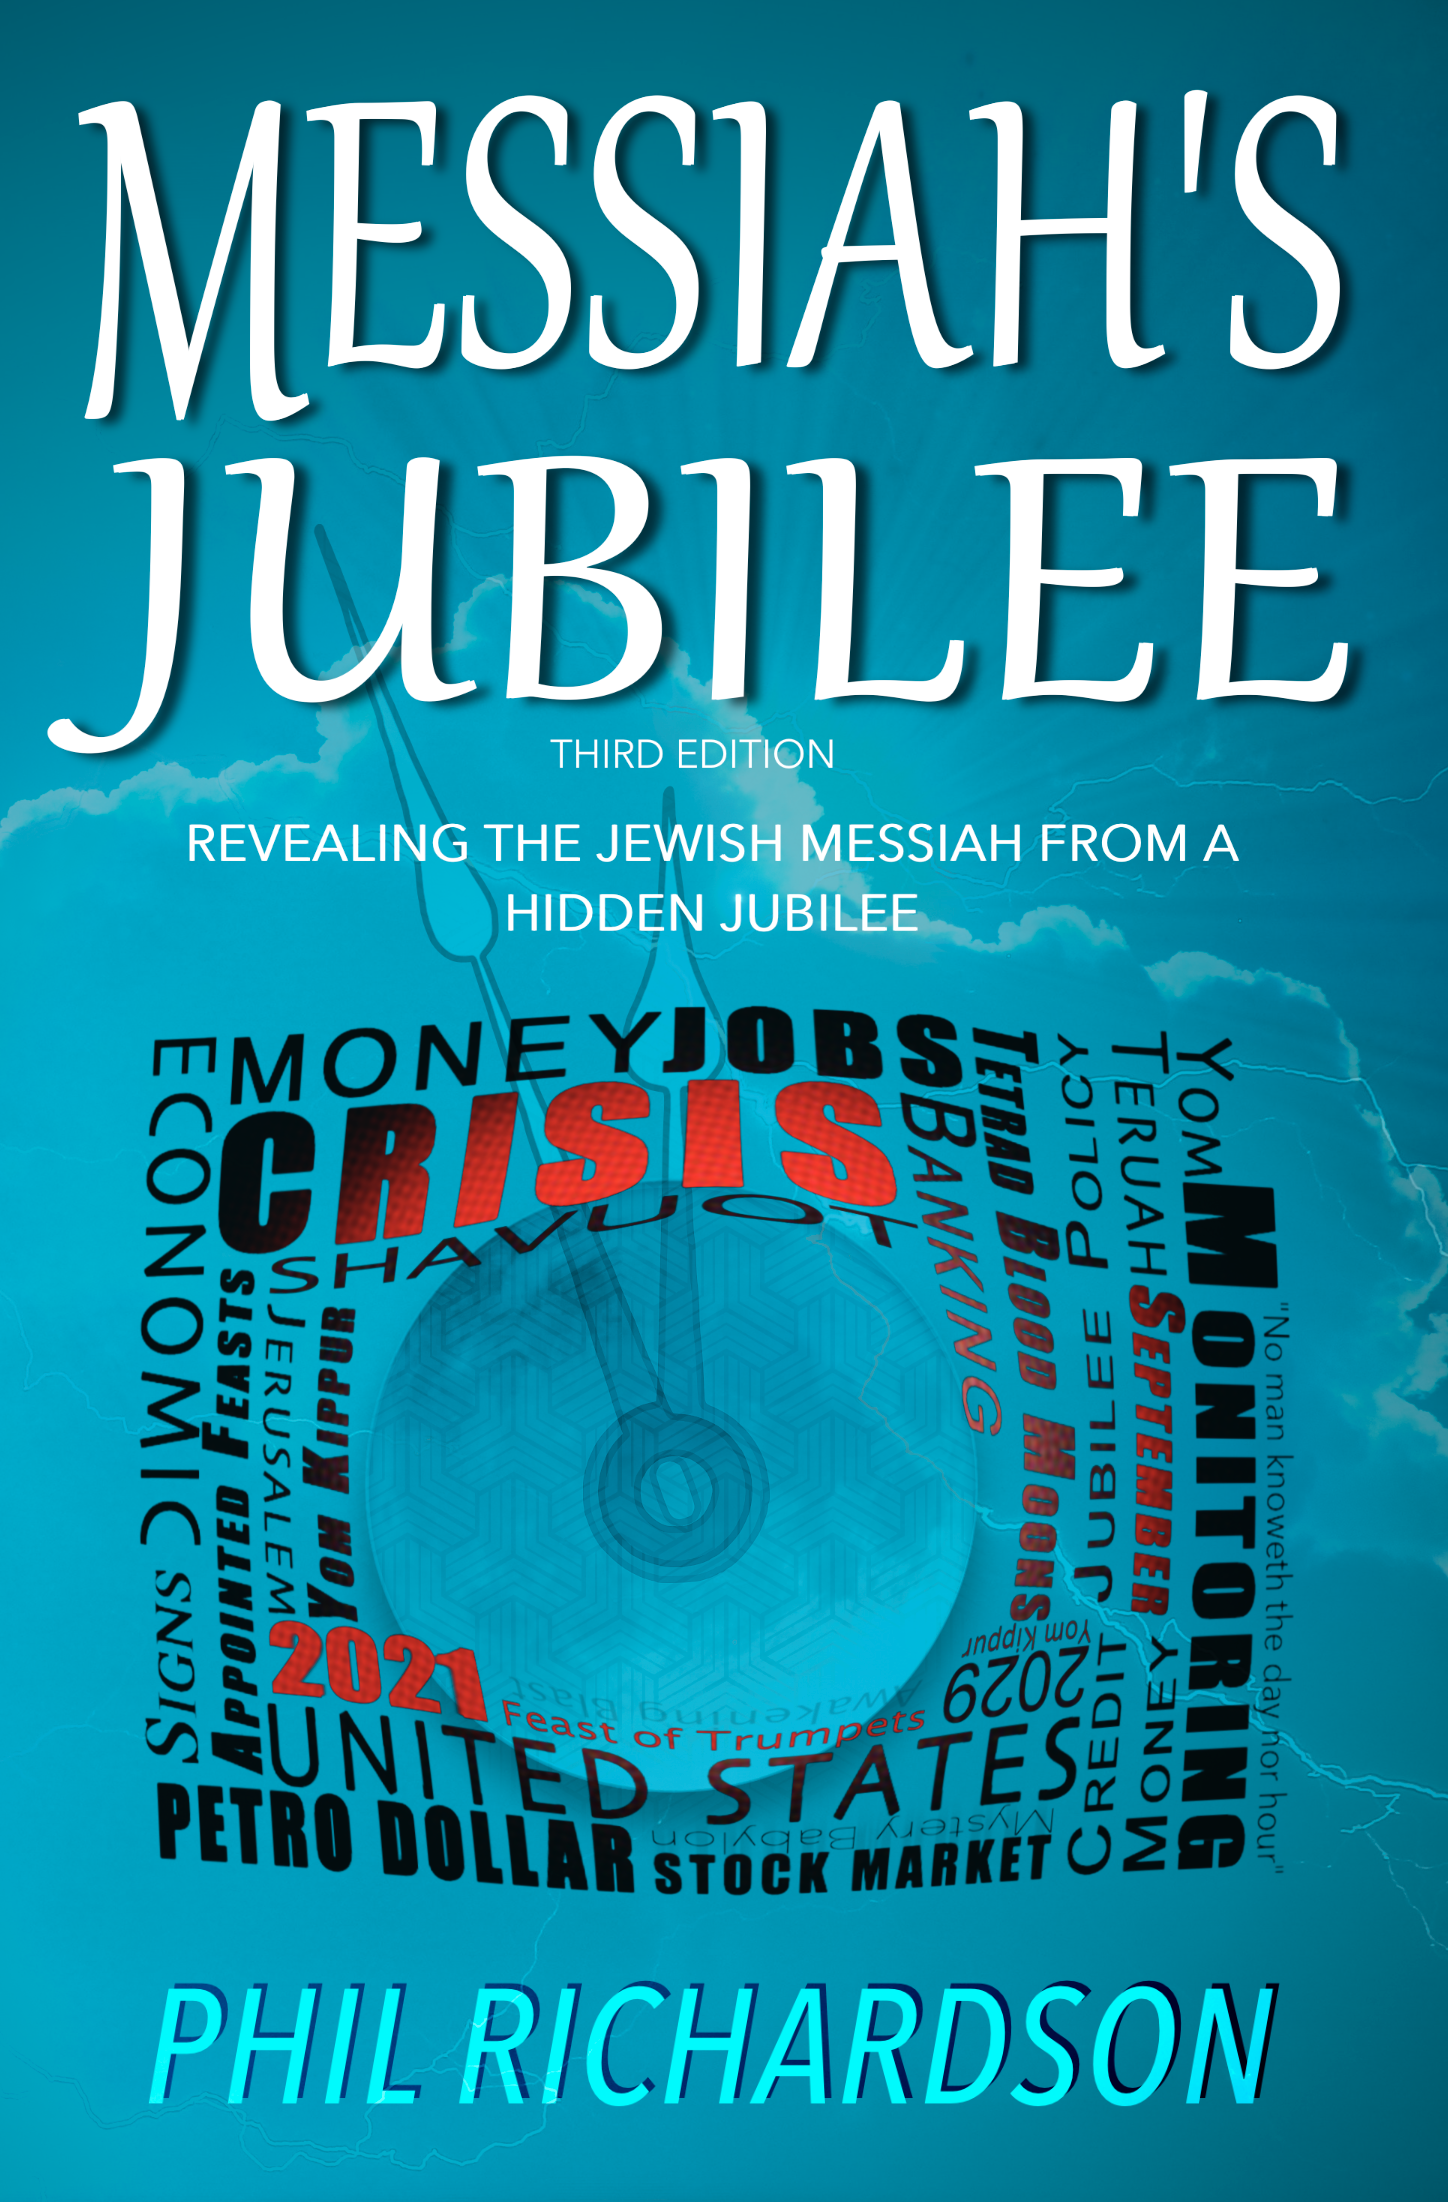 Front cover of Messiah's Jubilee Book (Third Edition)